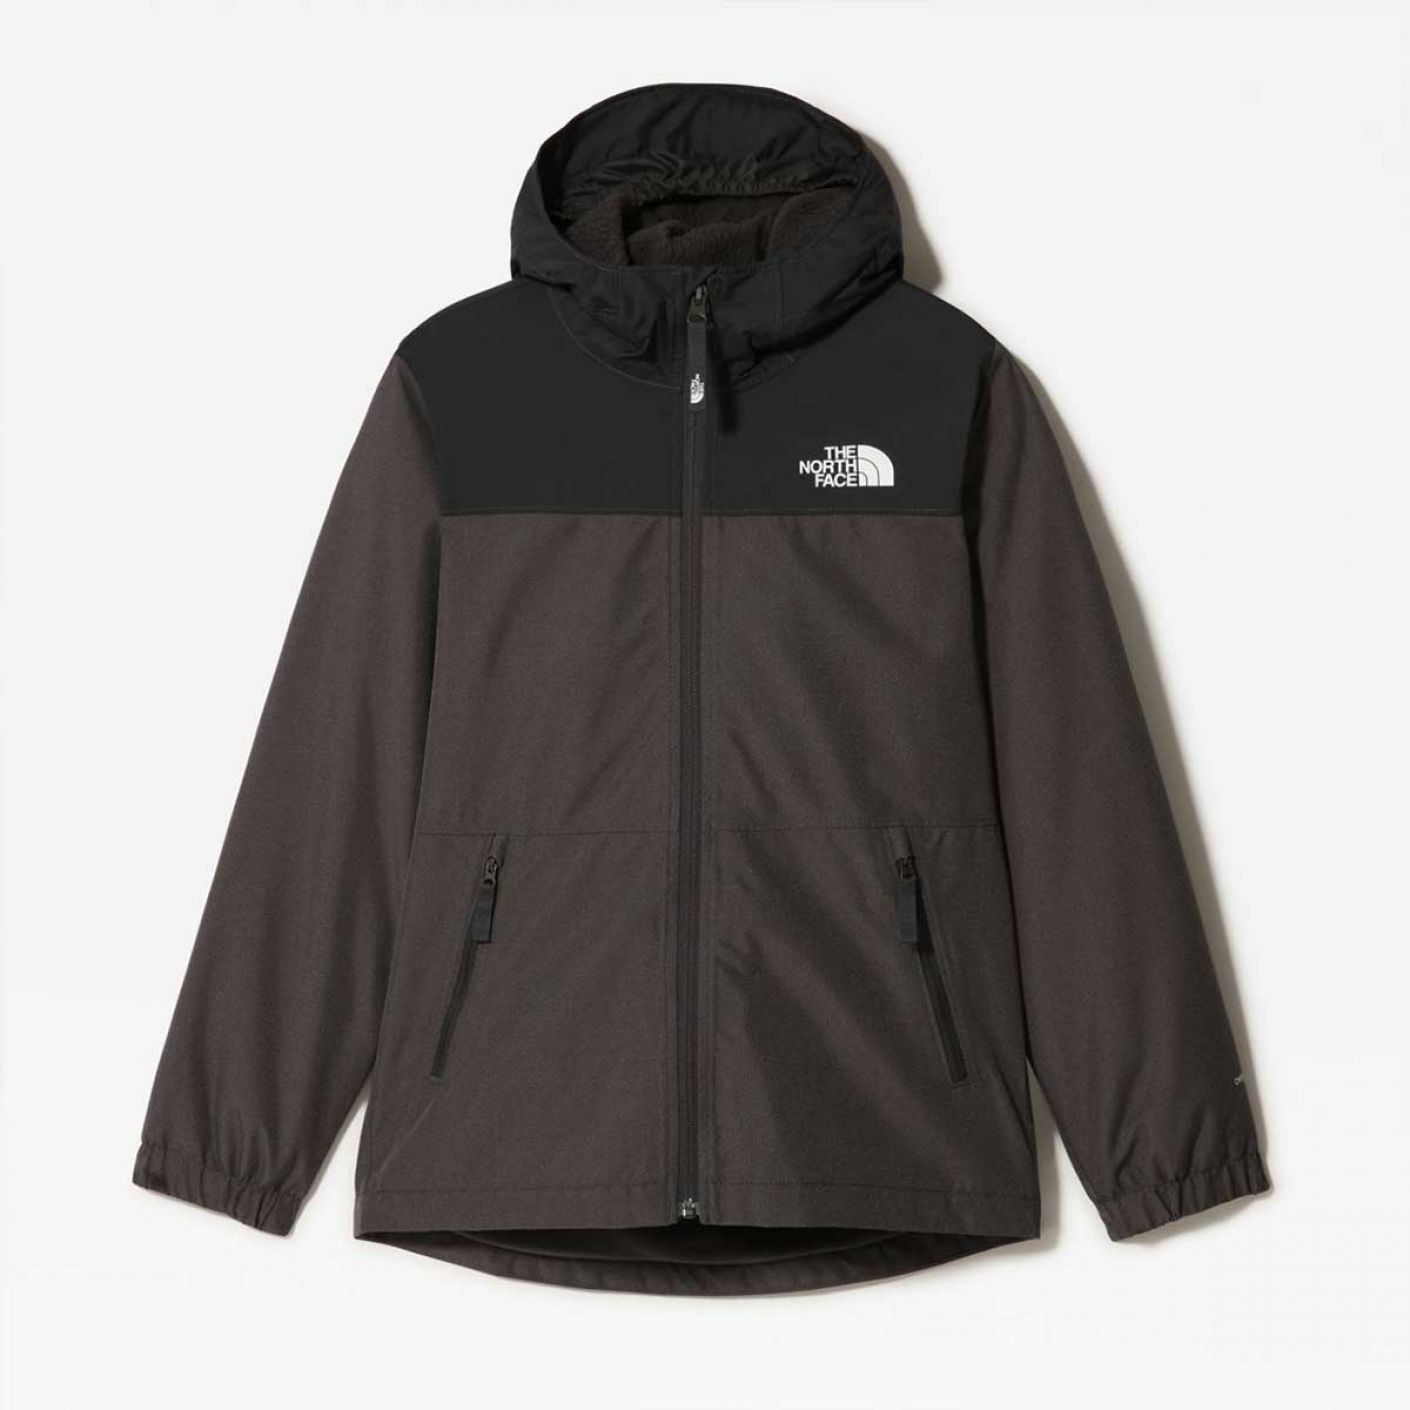 The North Face Kids Warm Storm Jacket Black-Gray